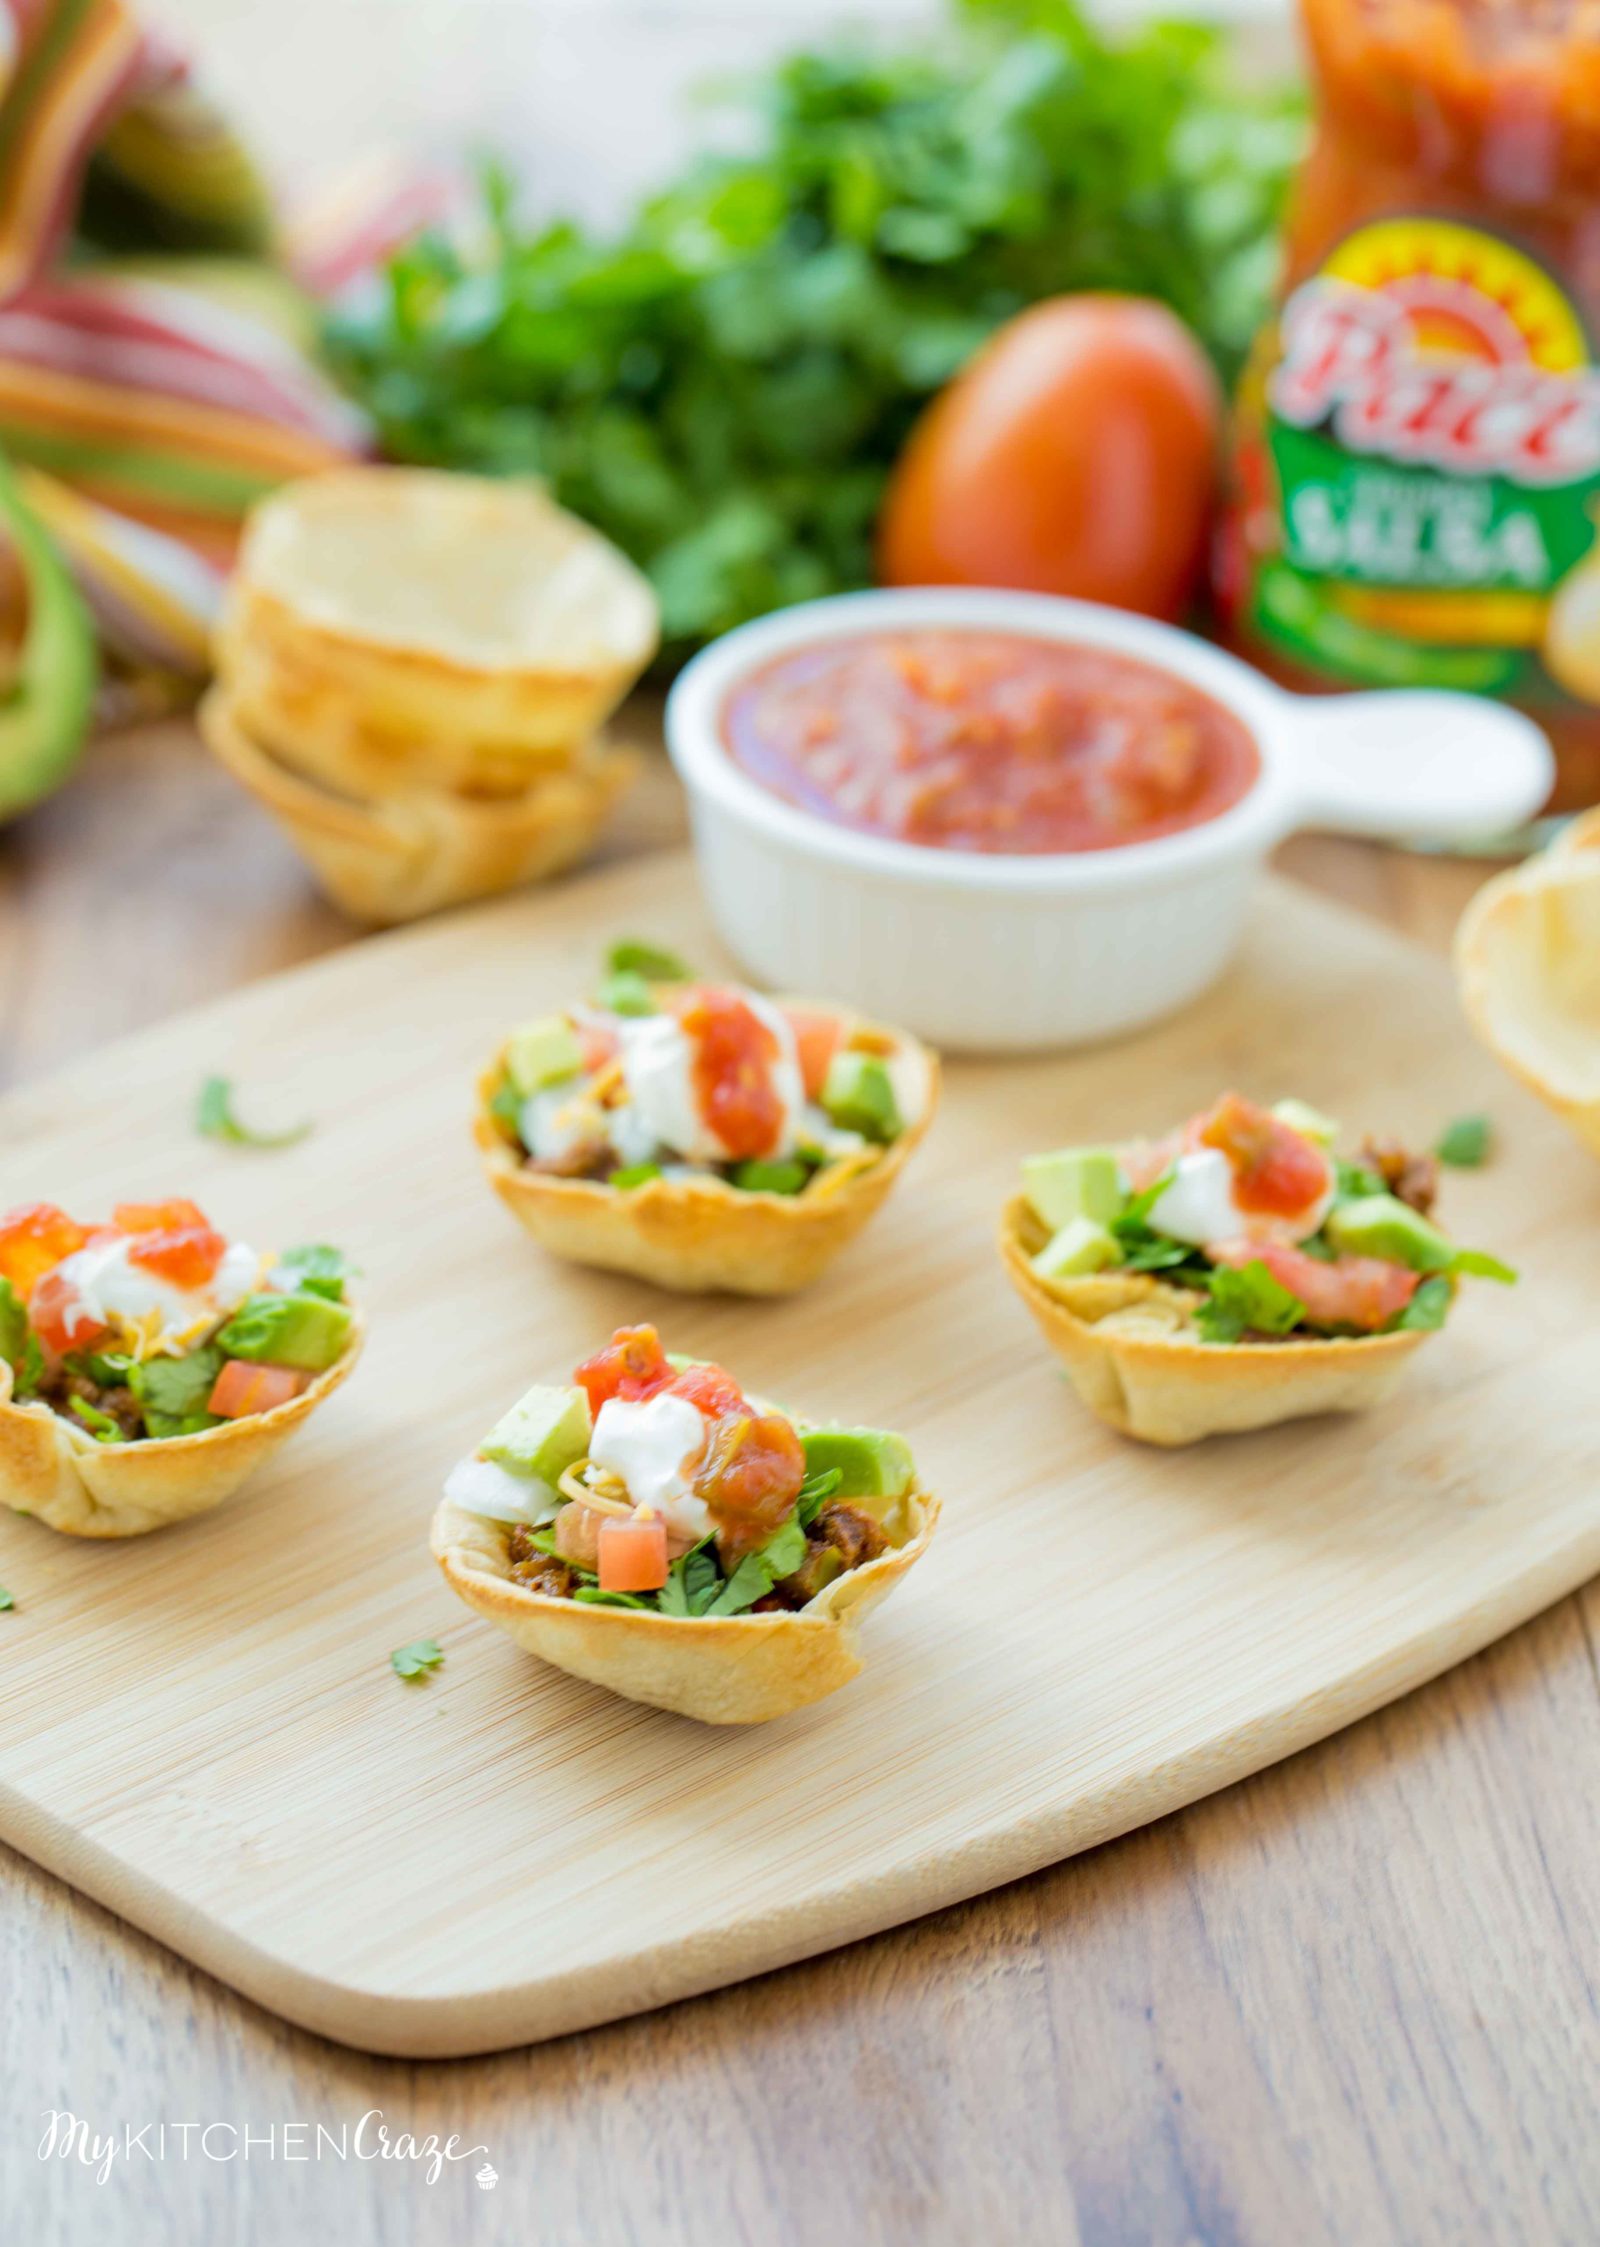 Taco Cups & Cheese Dip {Game Day Food} ~ Do you love to have snacks and appetizers on game day? Then you need to make these delicious Taco Cups and creamy Cheese Dip. Perfect foods to cheer on your favorite team. Go team!